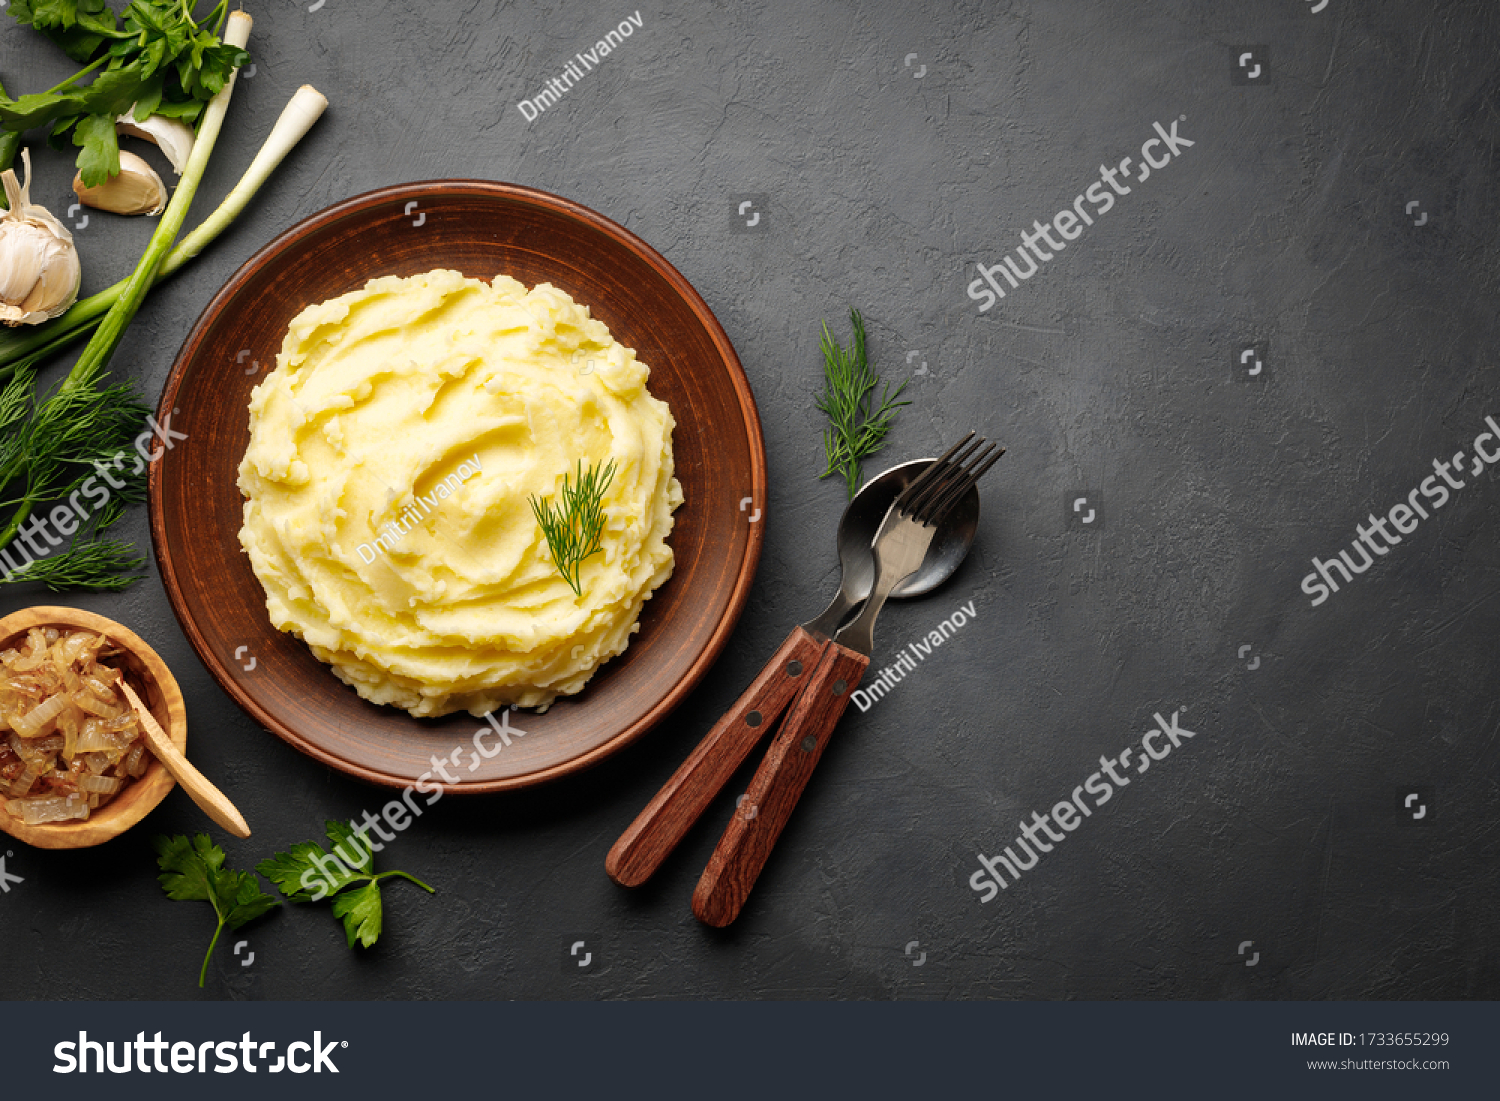 Mashed potatoes, boiled puree in a brown plate on a black slate background. Top view. Flat lay. Copy space. #1733655299